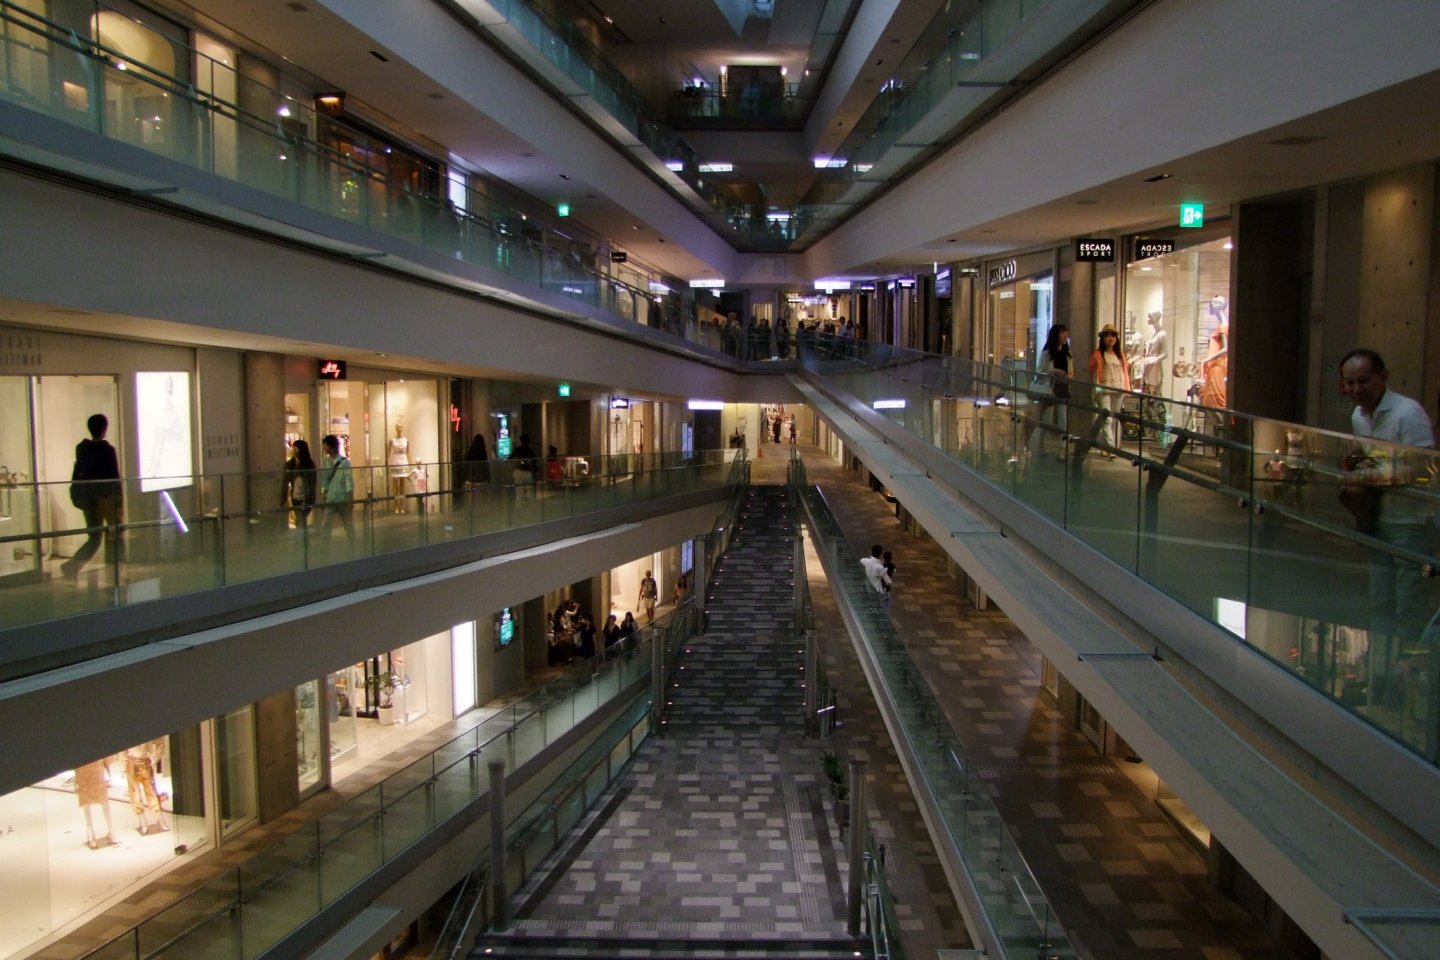 The mall features a single floor, spiraling up for 6 levels